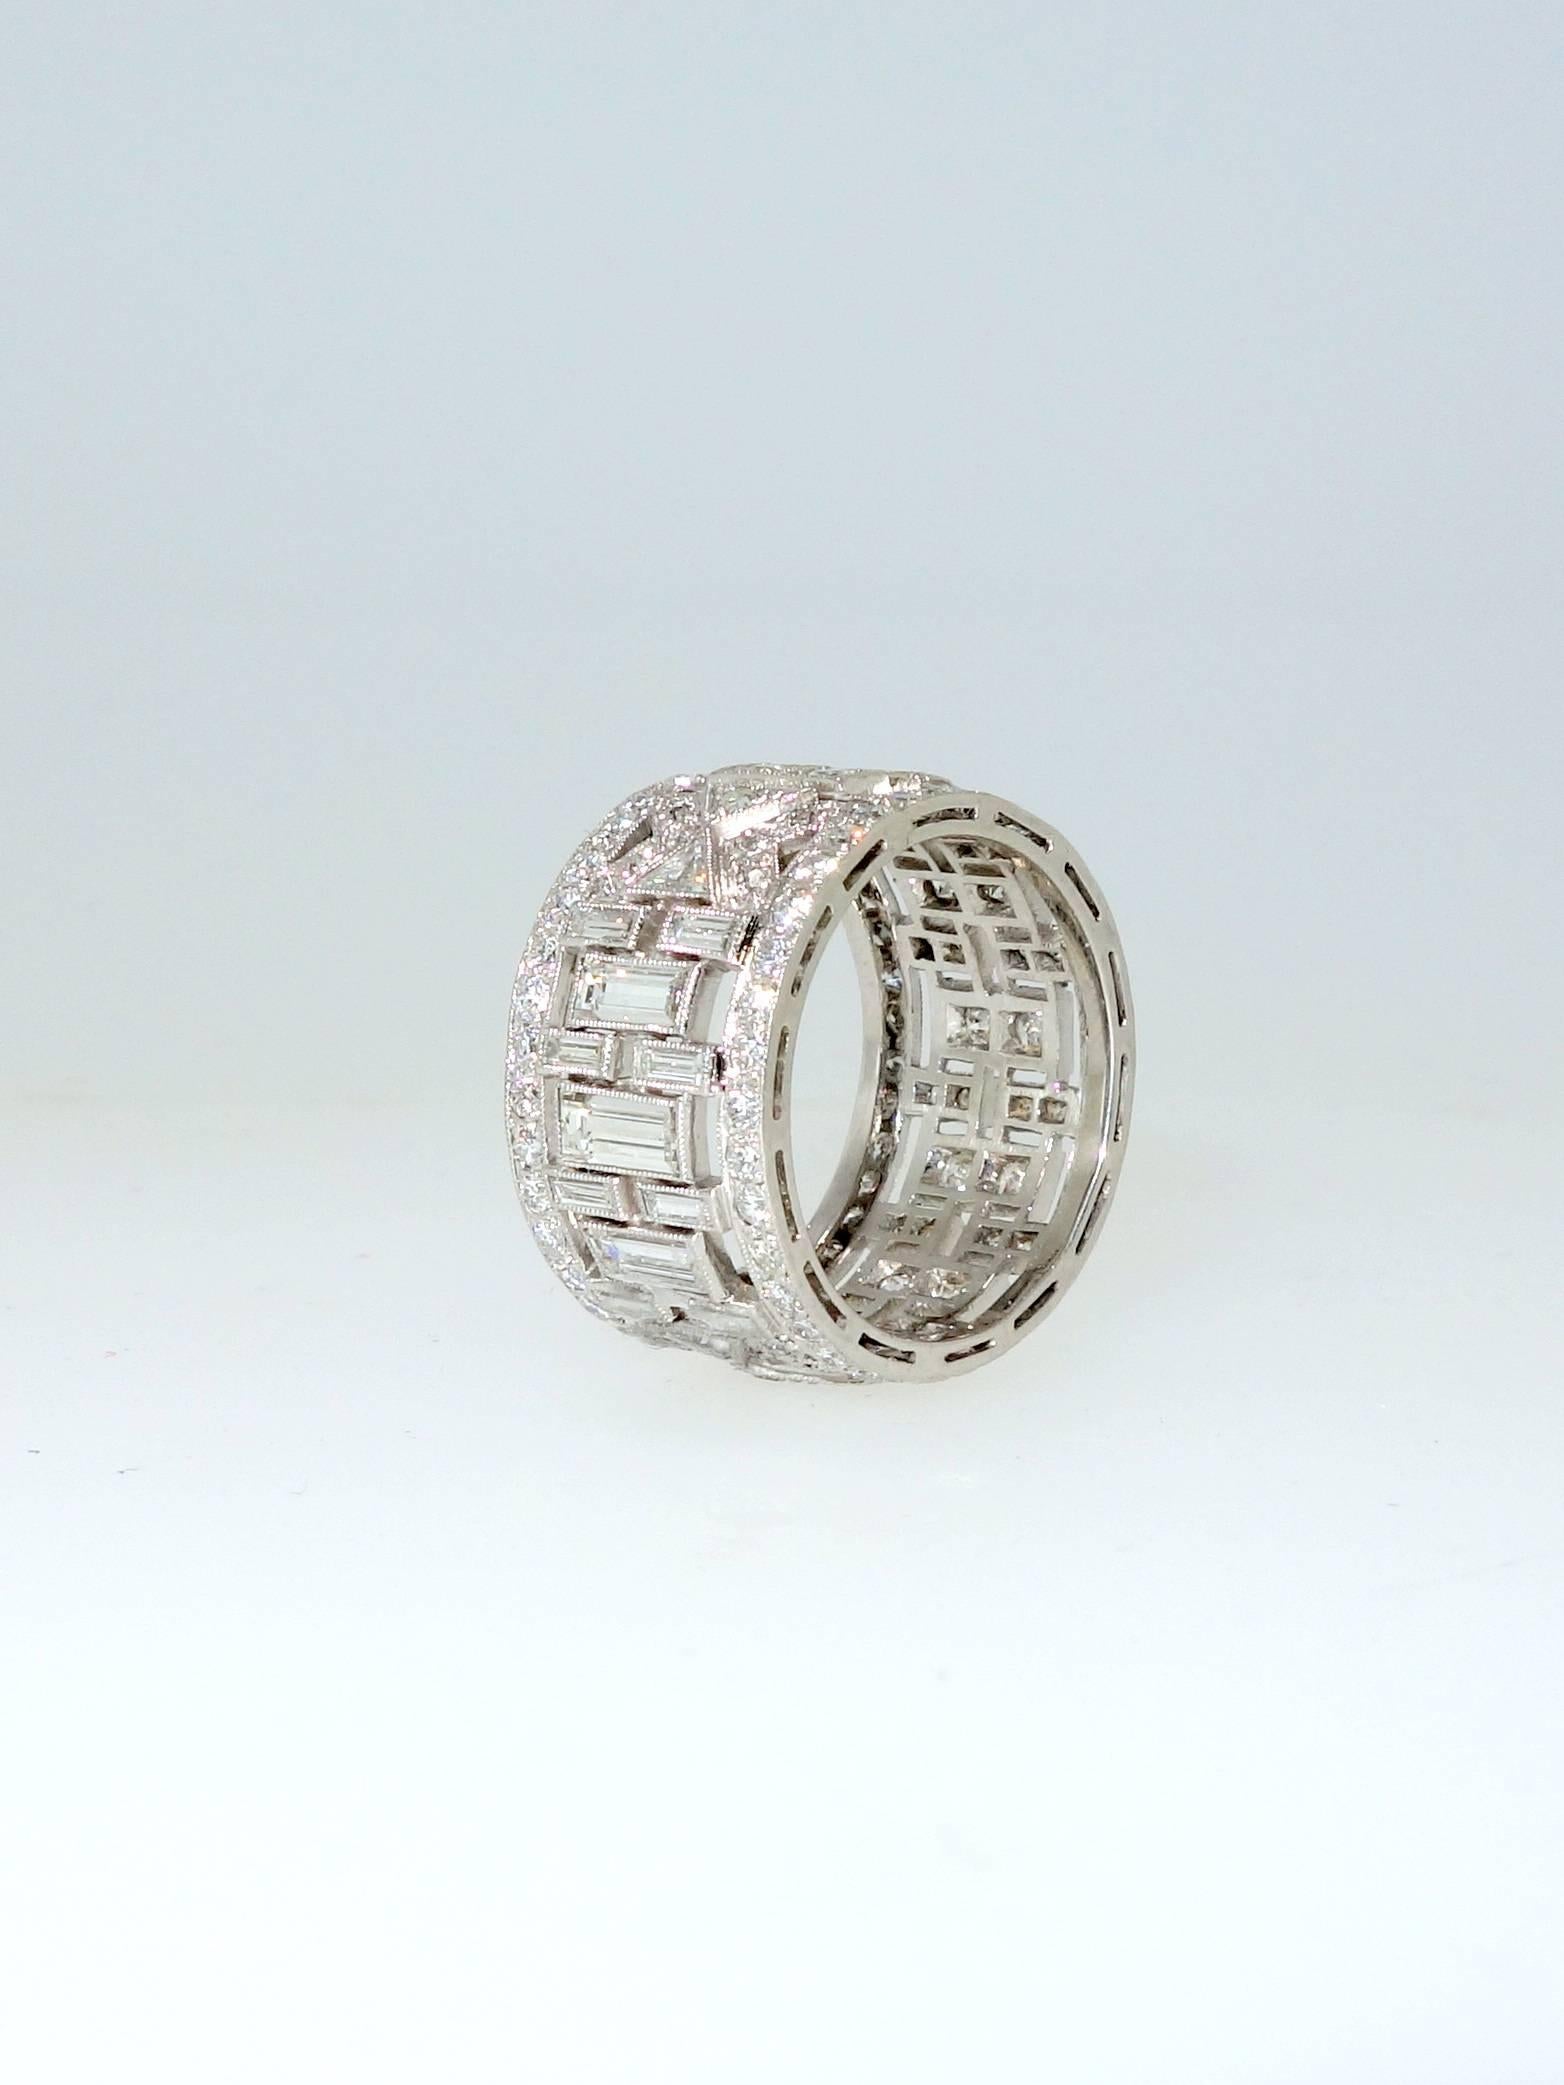 Set in platinum are round, baguette and triangular cut diamonds amounting to approximately 3.5 cts.  This band is a half inch wide and shows different rhythmic designs on each portion of the setting.  The diamonds are H/I in color (near colorless)